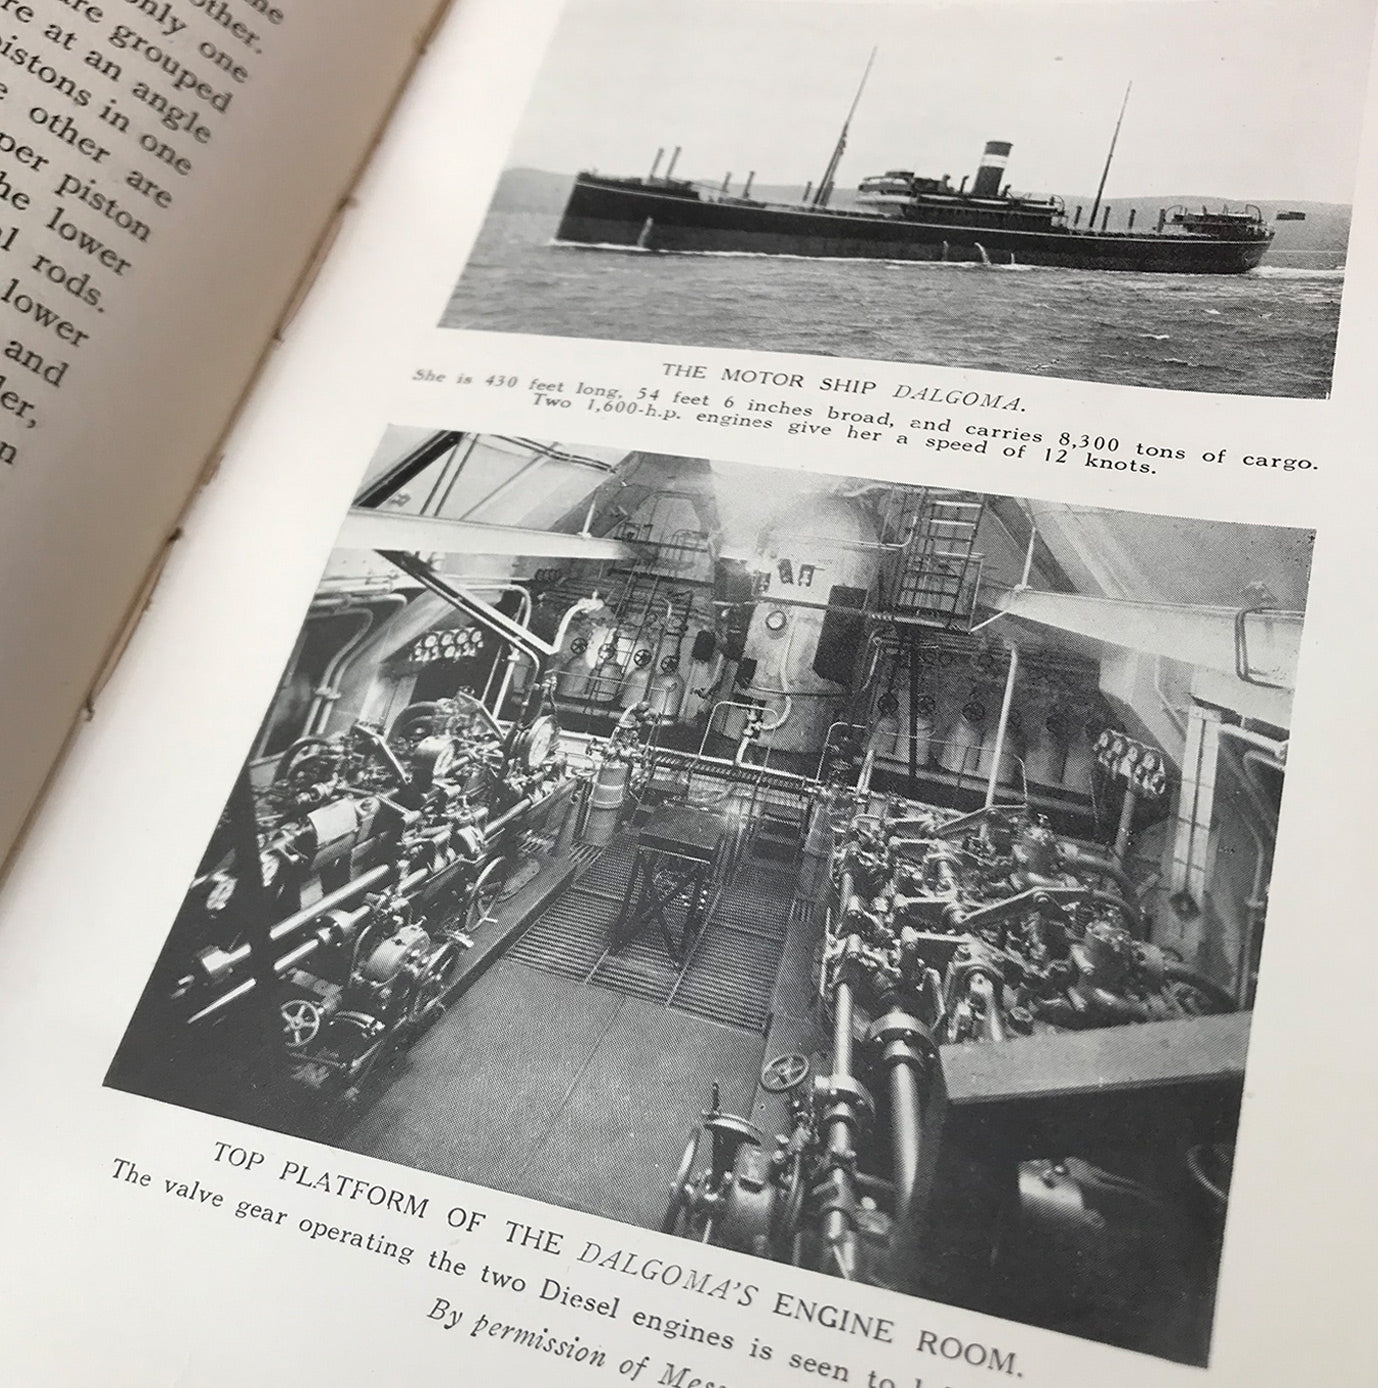 Cool bundle of Salty Sea Dog items - There's a Vintage Brass Anchor, Australian Naval Flag & two Nautical Books - All about our wonderful ships by Archibald Williams with some fantastic pictures in it & The Methods of Modern Navigation by Edward J. Willis - SHOP NOW - www.intovintage.co.uk